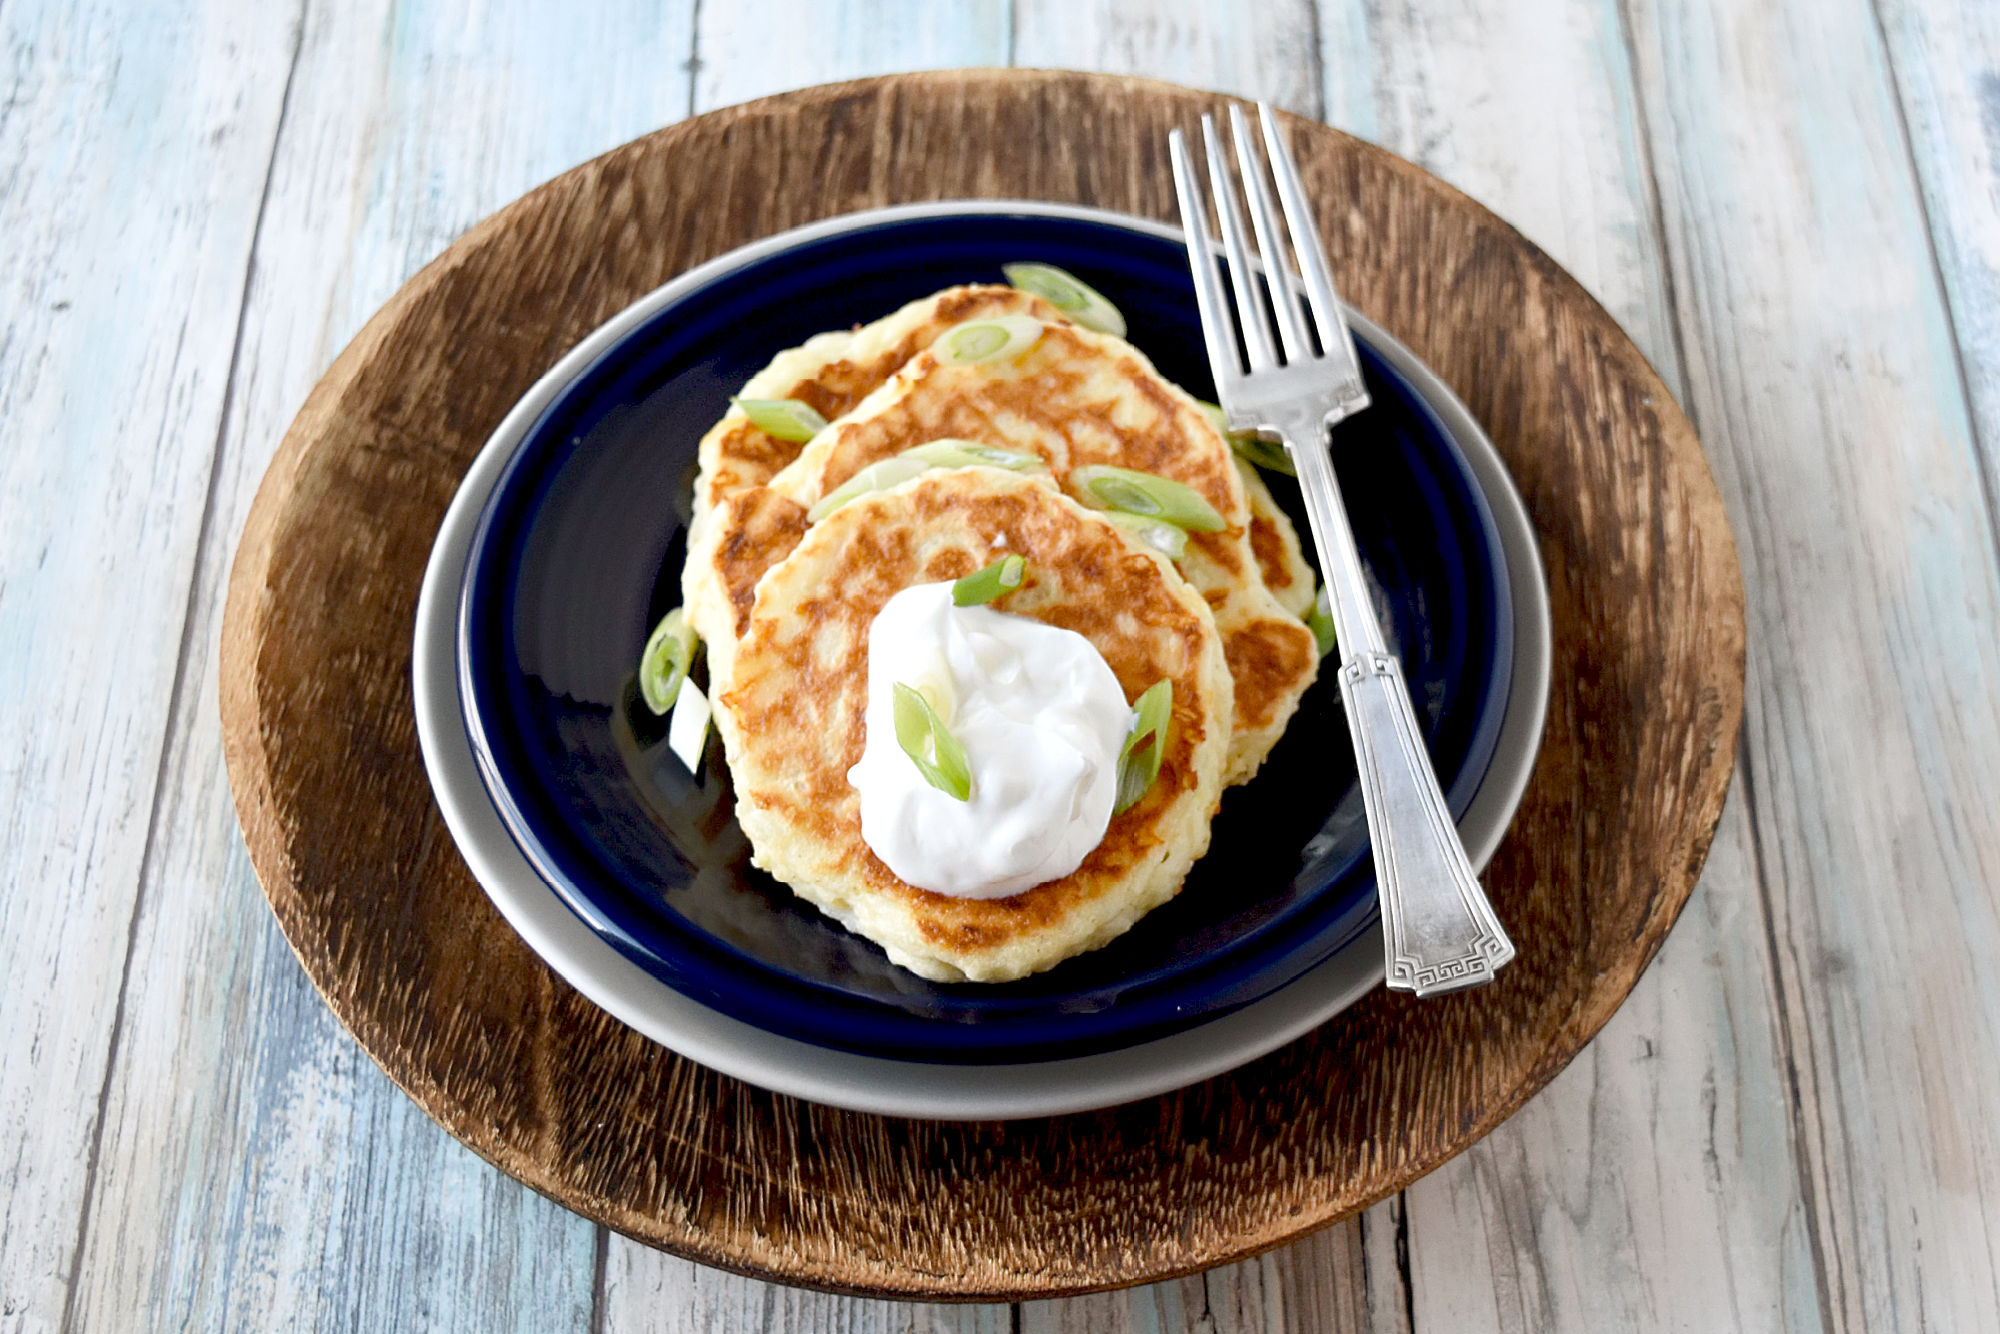 Nana’s Potato Pancakes is our family’s version of an Americanized boxty. Made with leftover mashed potatoes, they whip up in no time for a delicious and fun side dish or brunch recipe. #OurFamilyTable